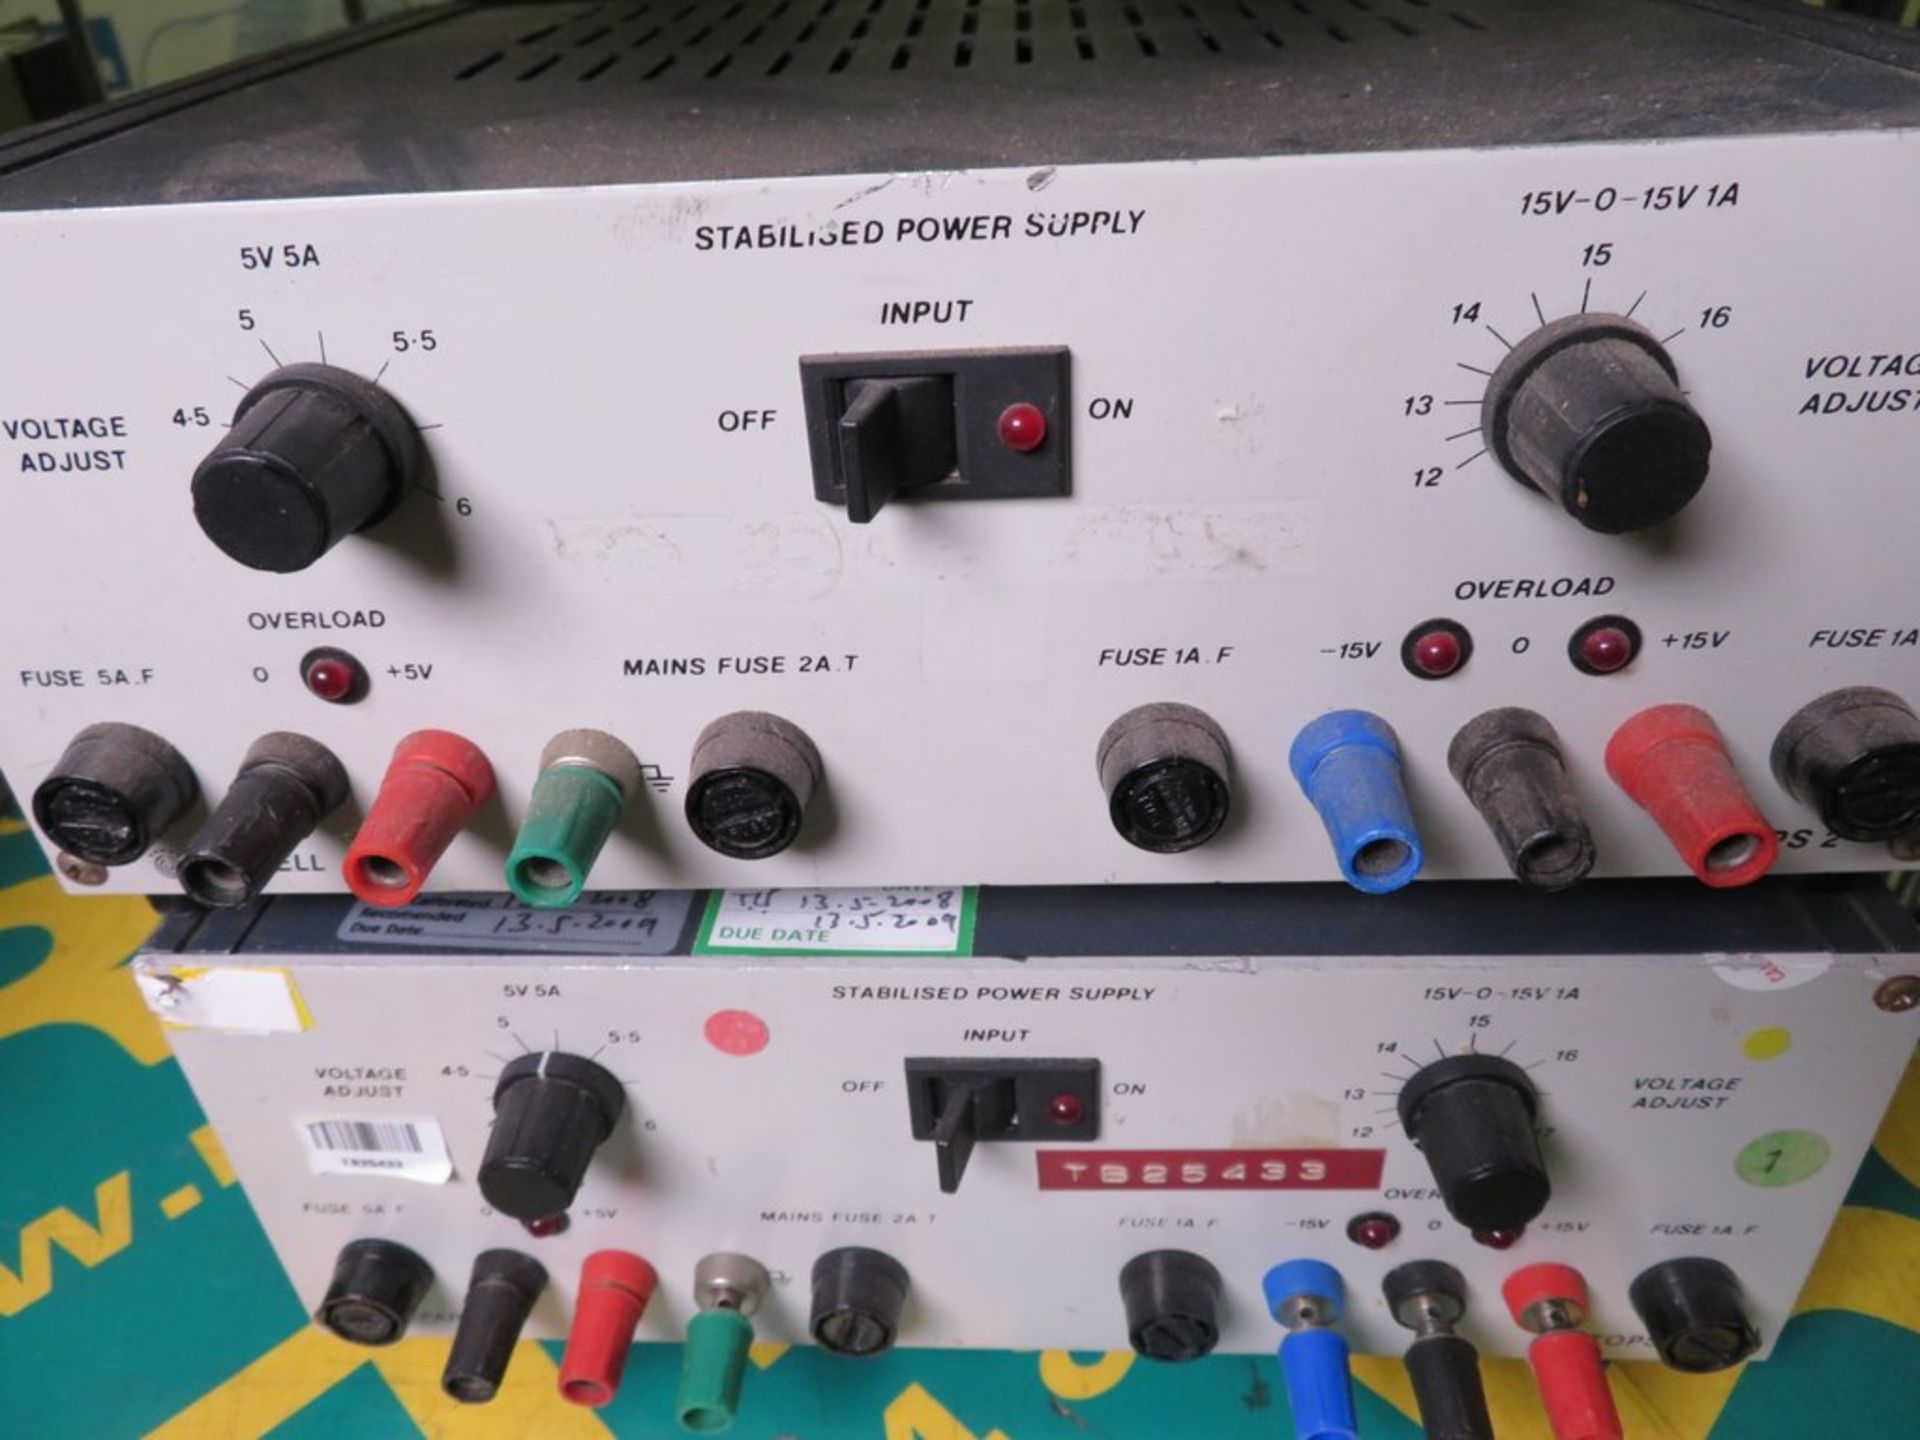 2x Farnell TOPS2 Stabilised Power Supplies - Image 3 of 3